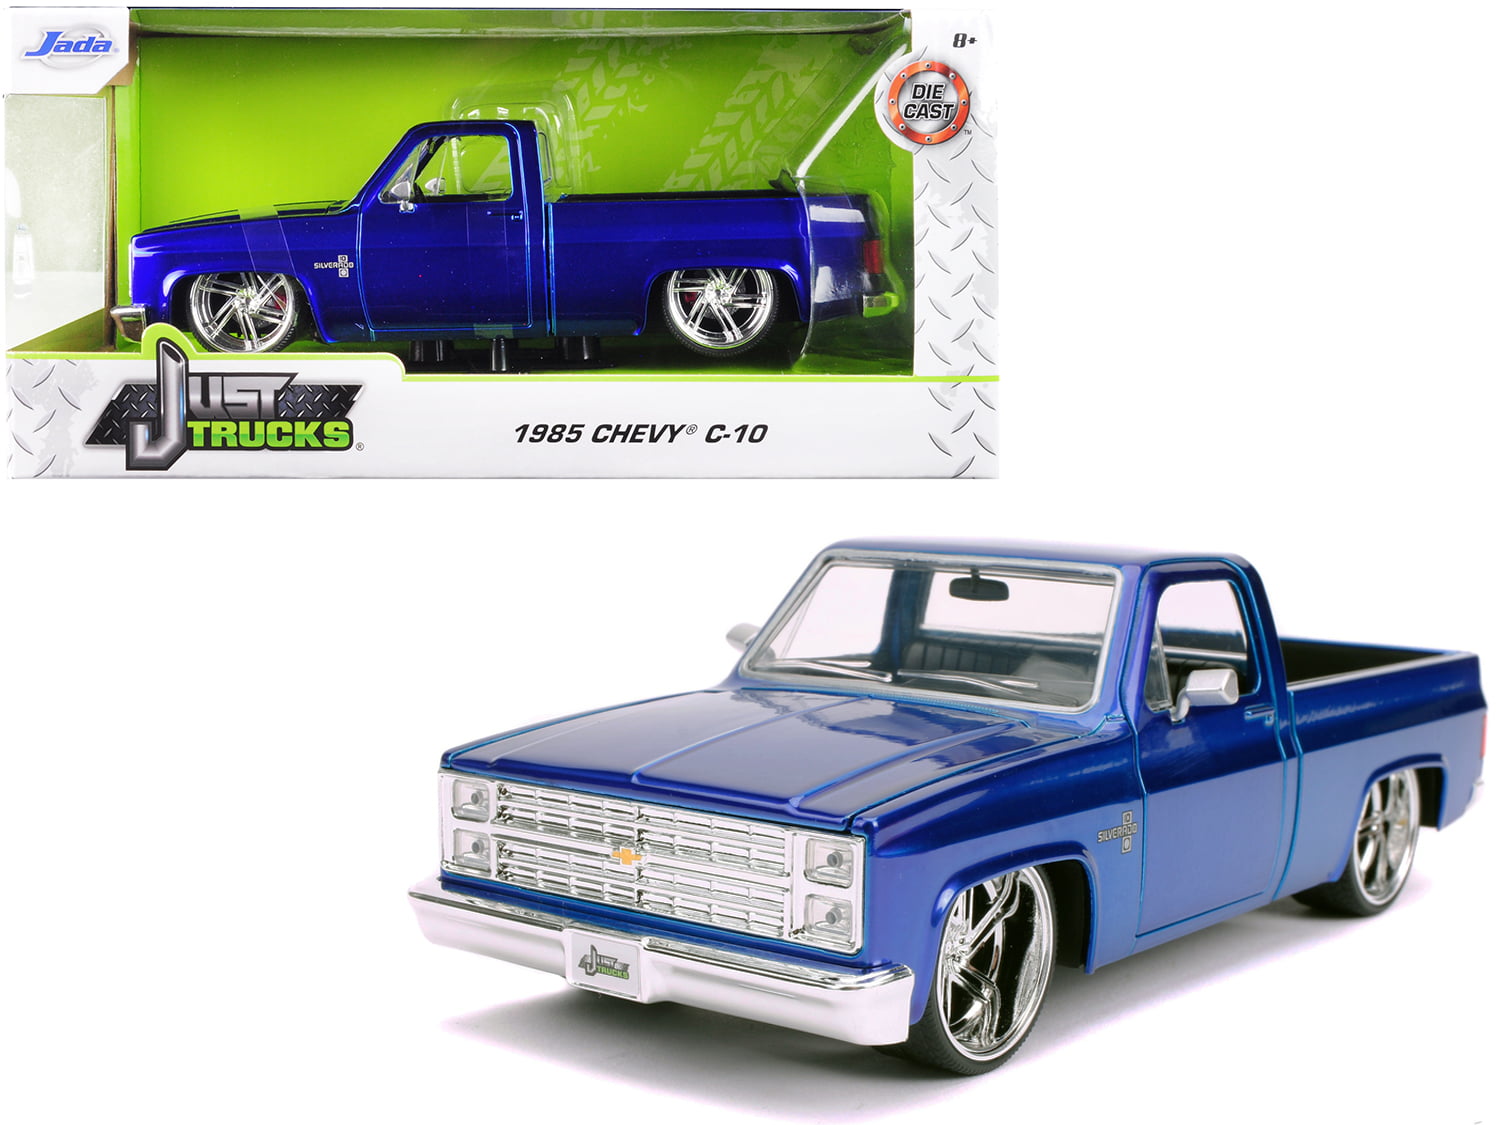 1985 Chevy C-10 Pickup Truck Diecast 1:24 Jada Toys 8 inch Blue with Rims